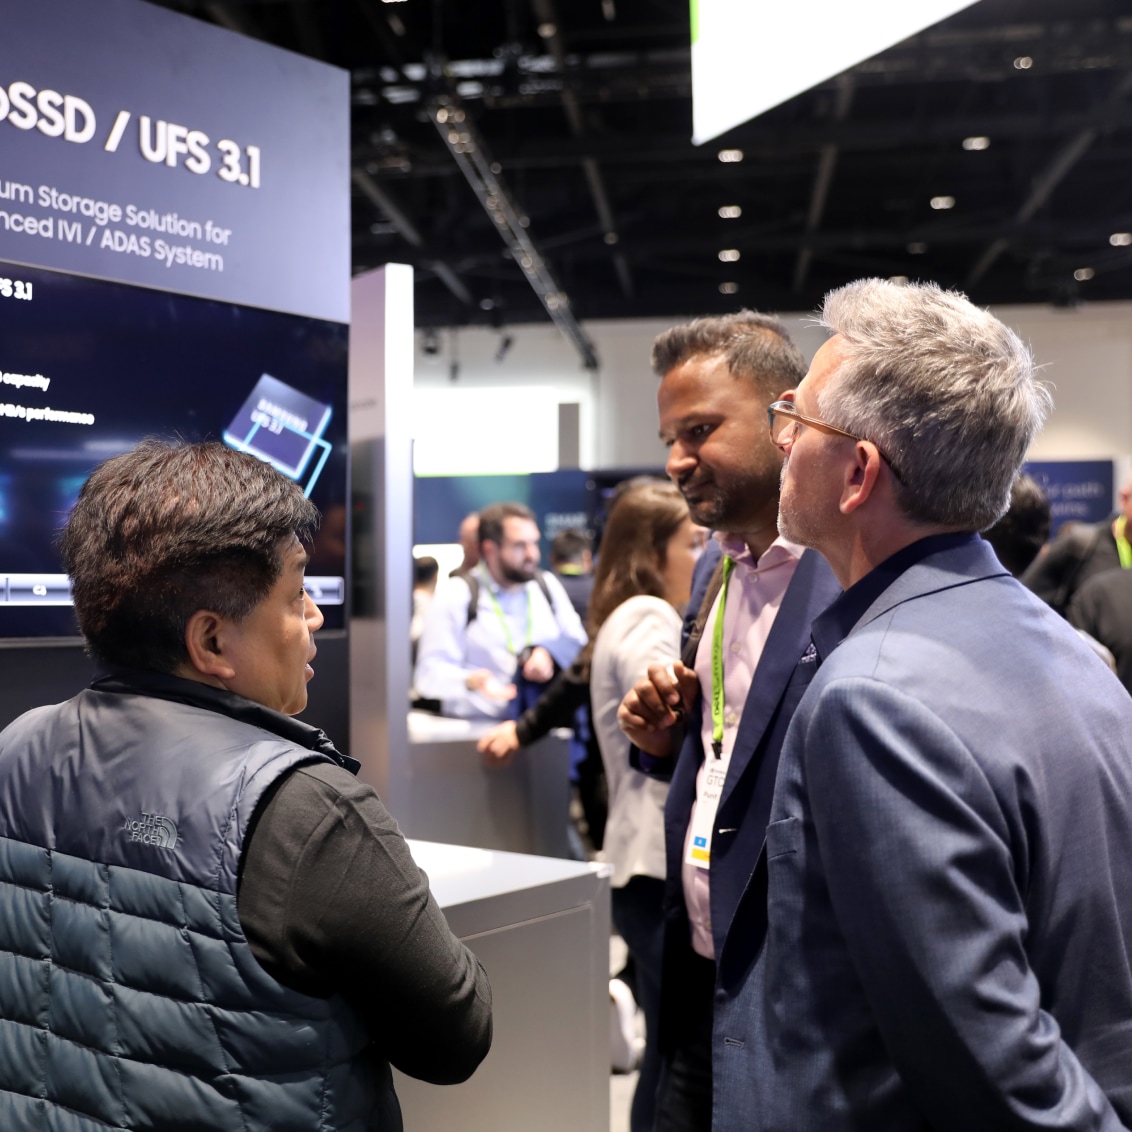 Professionals engaged in a conversation at NVIDIA GTC 2024, with a display about SSD/UFS 3.1 in the background.